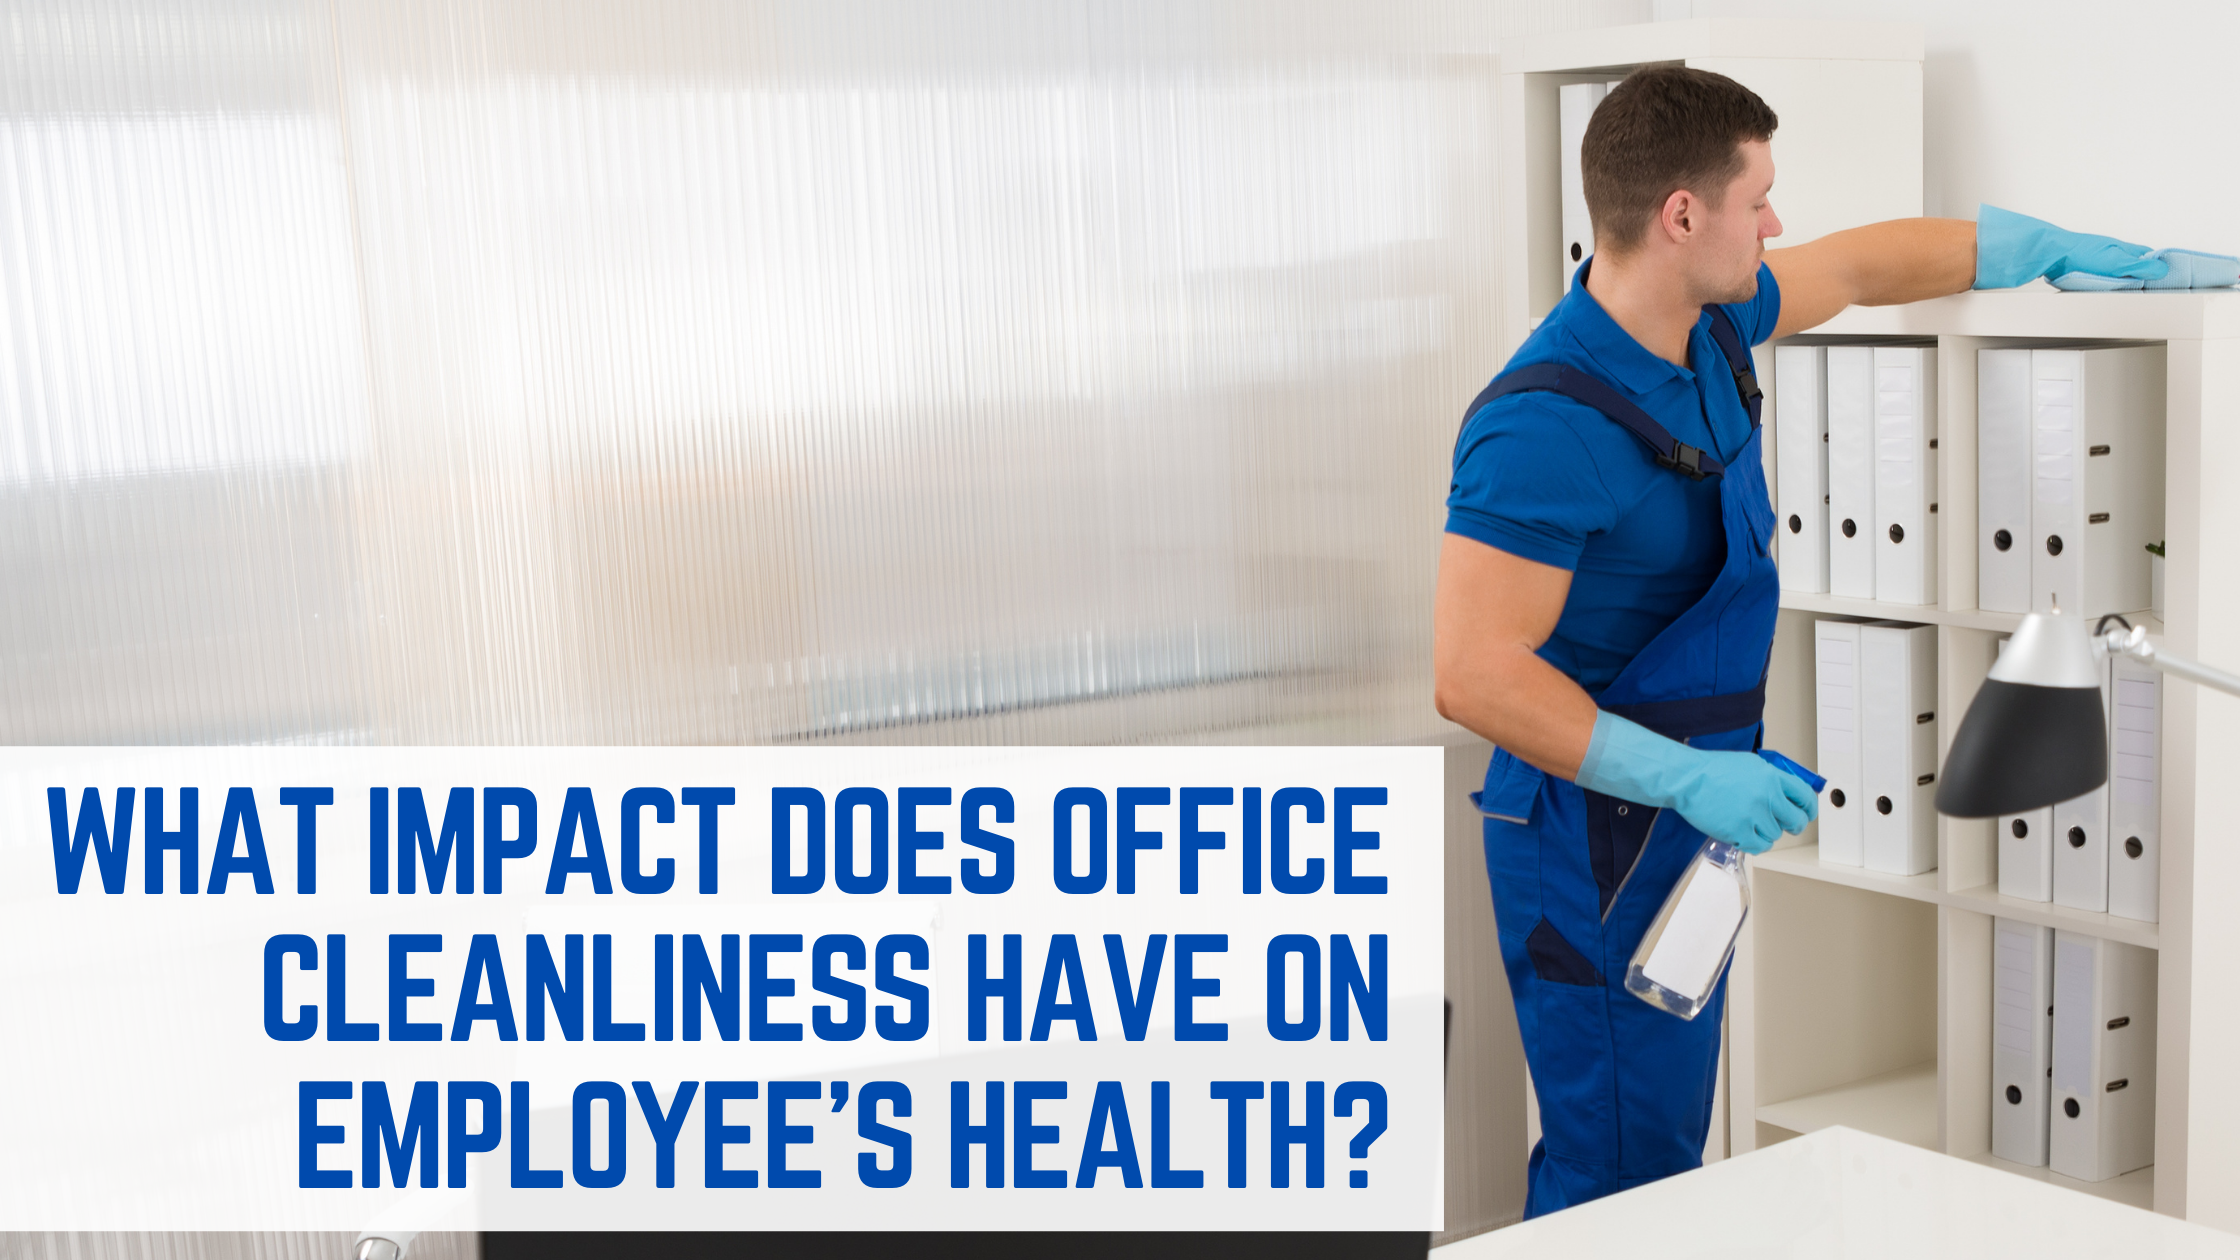 Understanding the Importance of Workplace Cleanliness